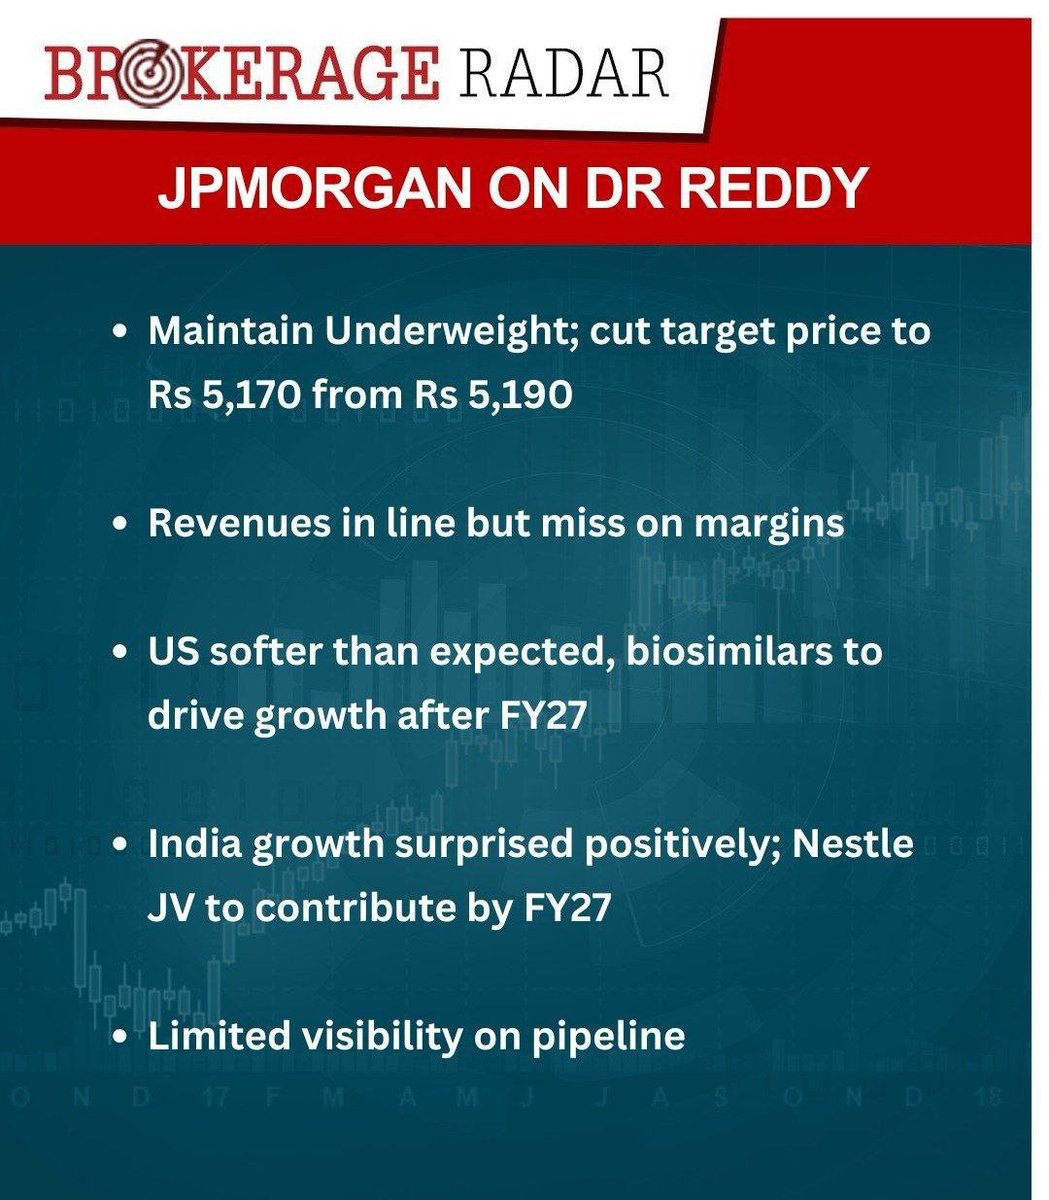 #JPMorgan on #DrReddy maintains underweight; cuts target price to Rs 5,170 from Rs 5,190